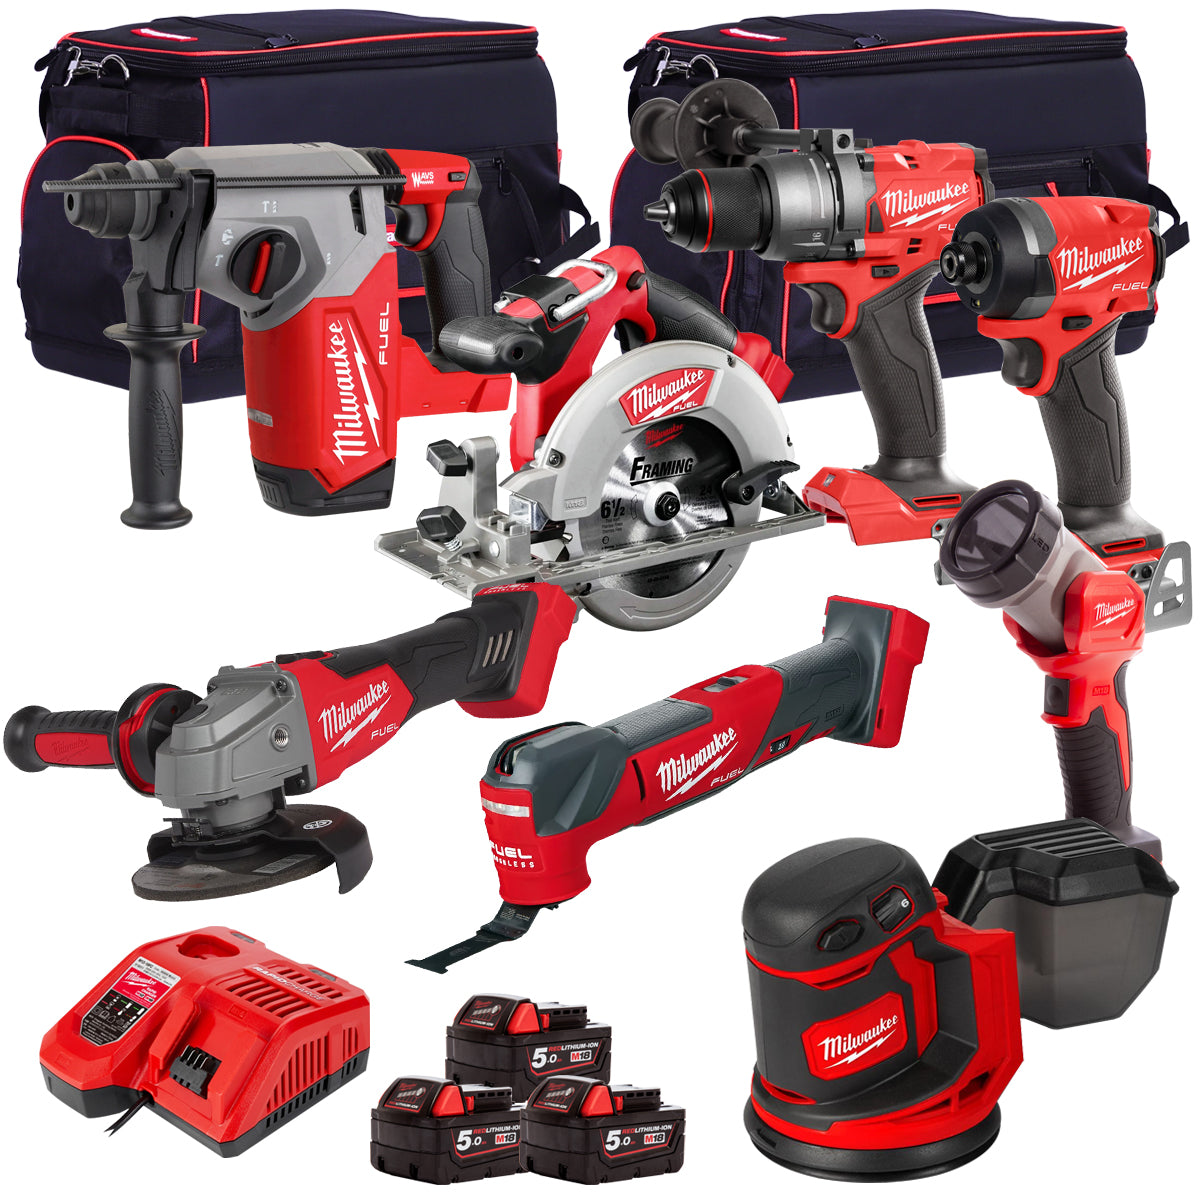 Milwaukee 18V Cordless 8 Piece Tool Kit with 3 x 5.0Ah Batteries & Charger in Bag T4TM-1